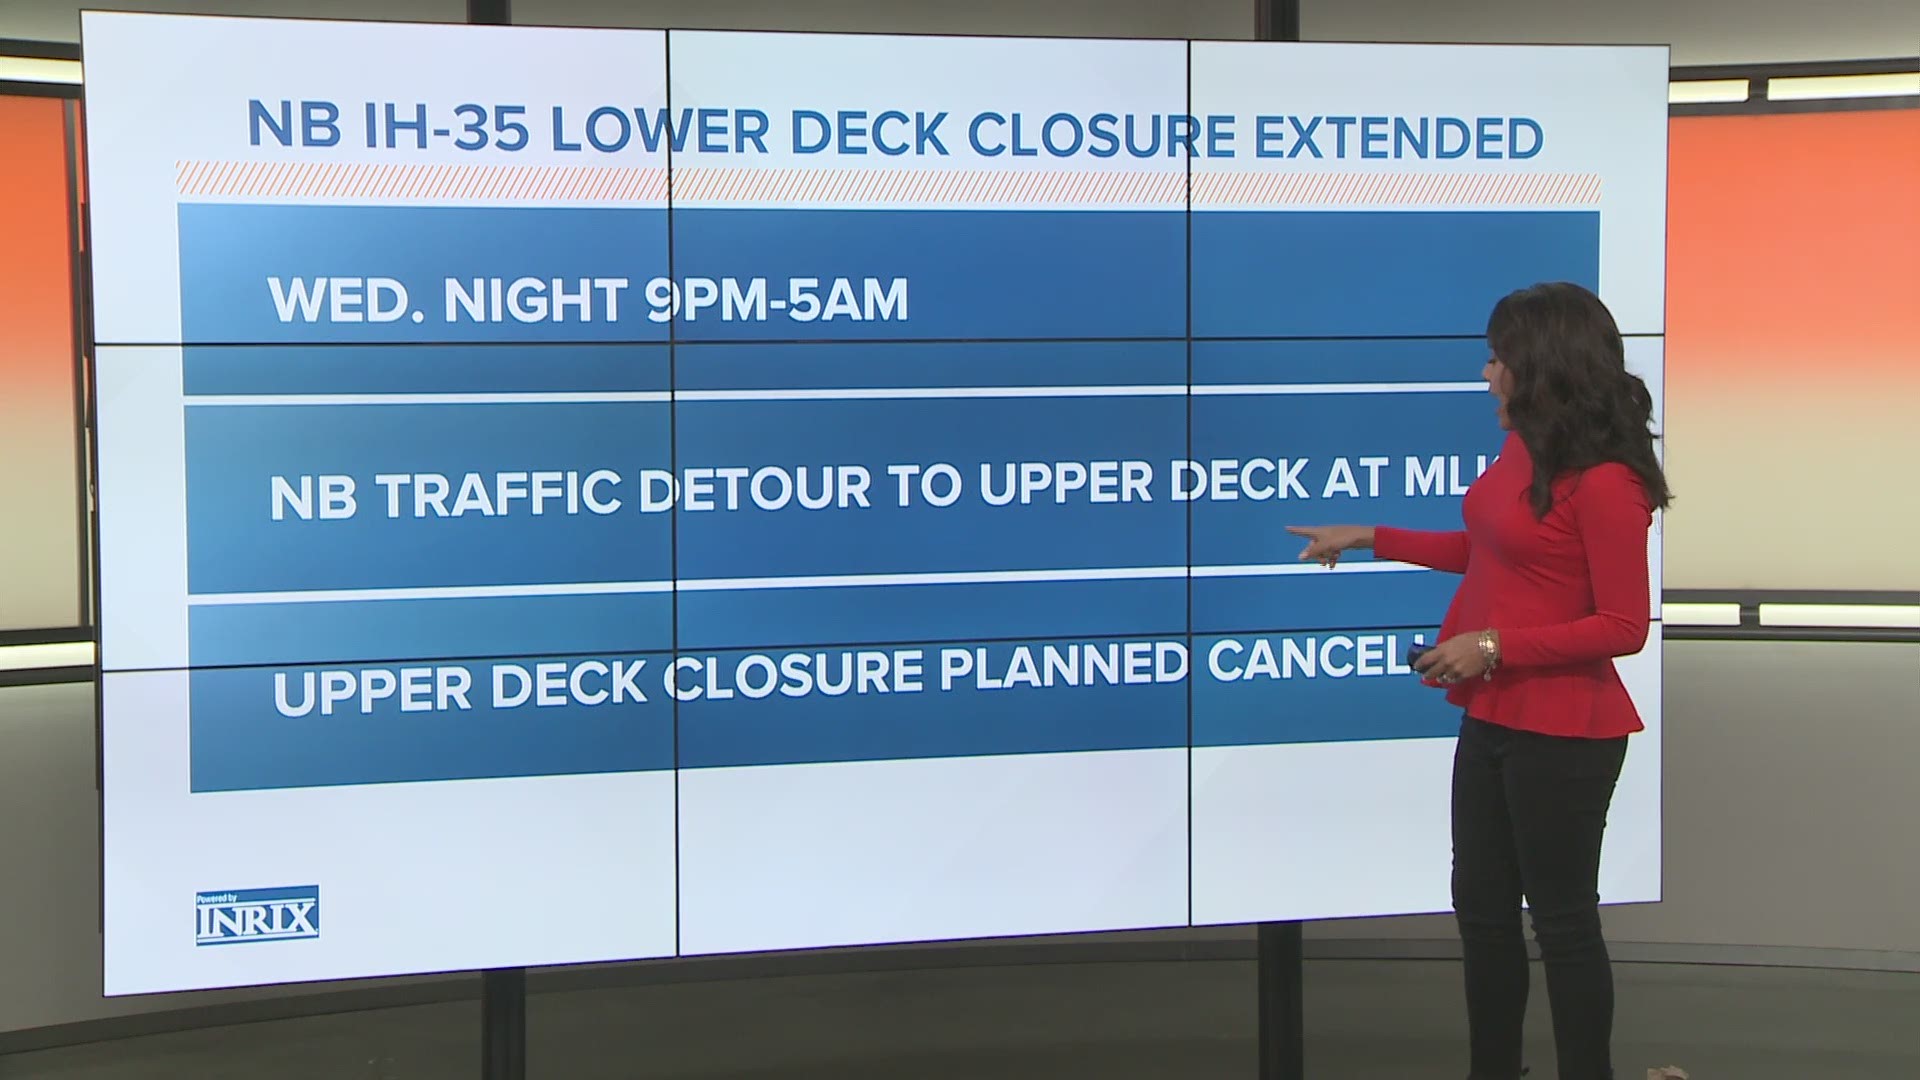 I-35's lower deck is undergoing a closure extension.